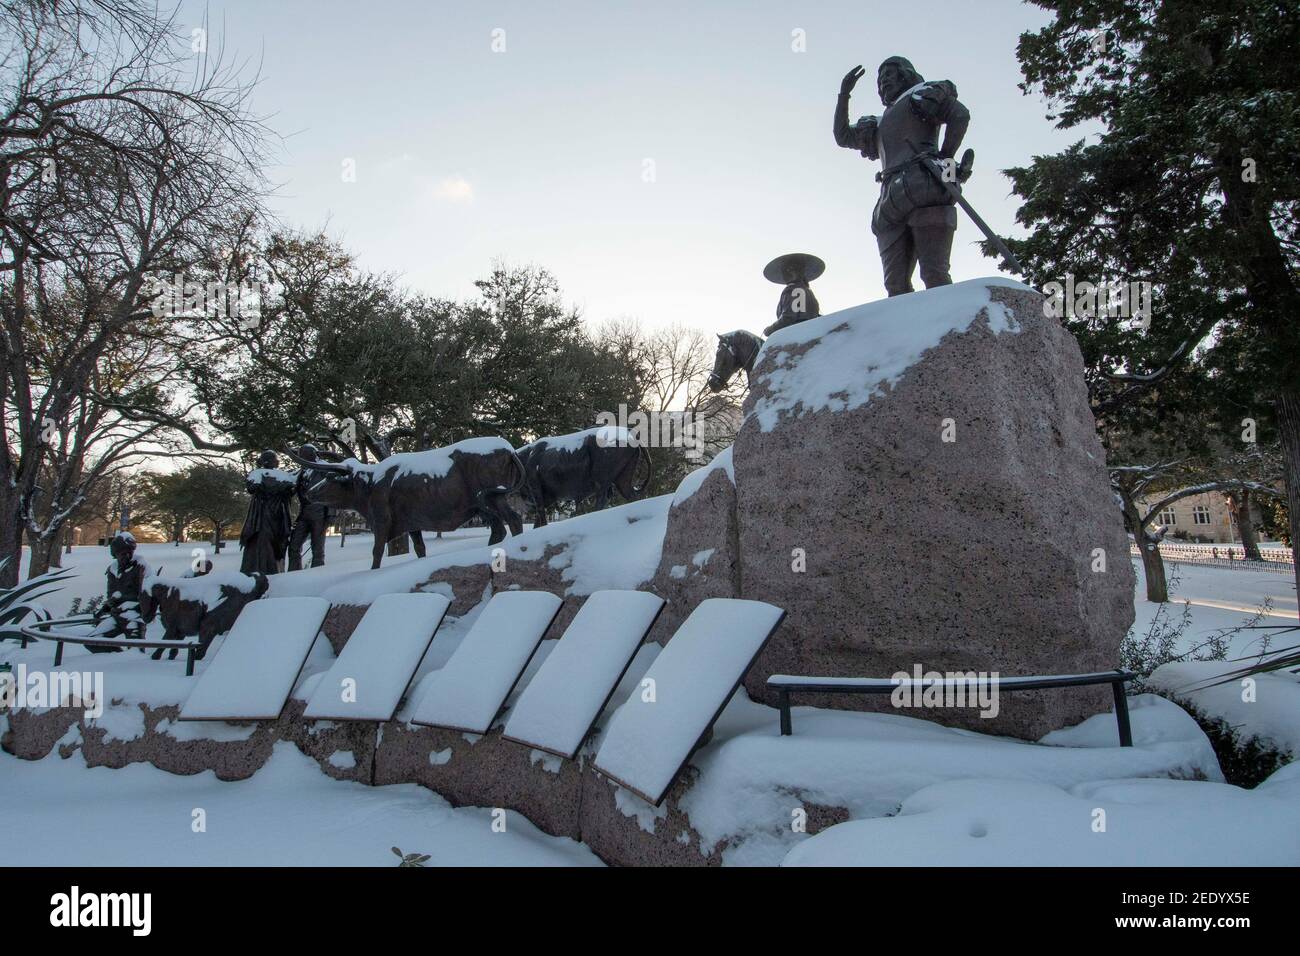 Austin, Texas USA Feb 15, 2021: The Texas Capitol grounds including the Tejano Monument are covered in 6-7 inches of rare snowfall Monday morning after an overnight winter storm blew into central Texas. Most offices and schools are closed until warmer weather arrives later in the week. Credit: Bob Daemmrich/Alamy Live News Stock Photo